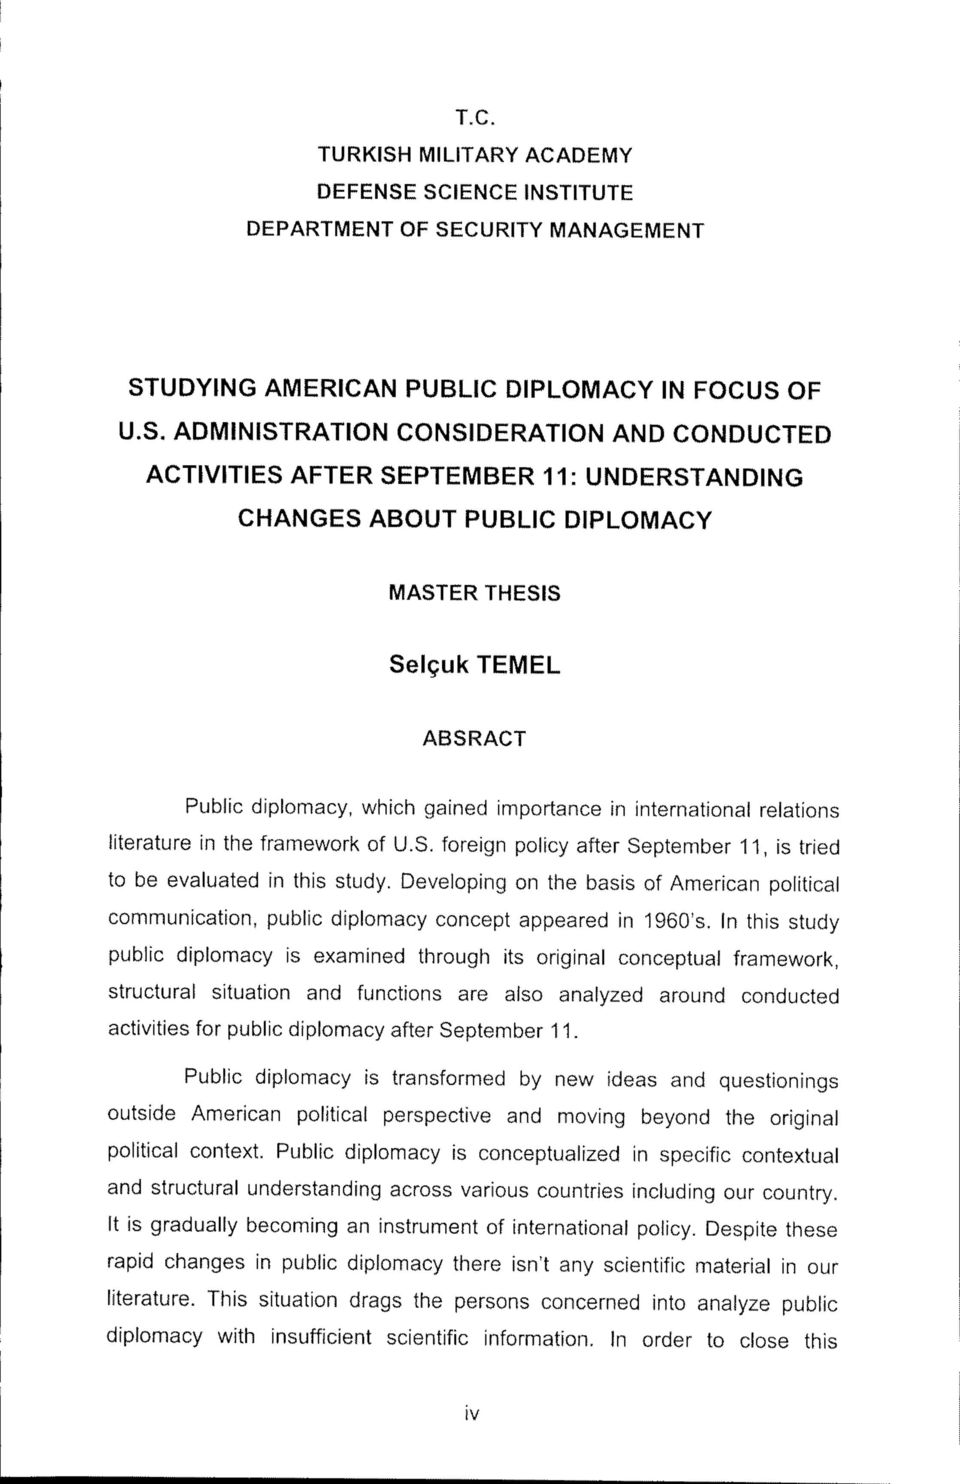 SCIENCE INSTITUTE DEPARTMENT OF SECURITY MANAGEMENT STUDYING AMERICAN PUBLIC DIPLOMACY IN FOCUS OF U.S. ADMINISTRATION CONSIDERATION AND CONDUCTED ACTIVITIES AFTER SEPTEMBER 11: UNDERSTANDING CHANGES